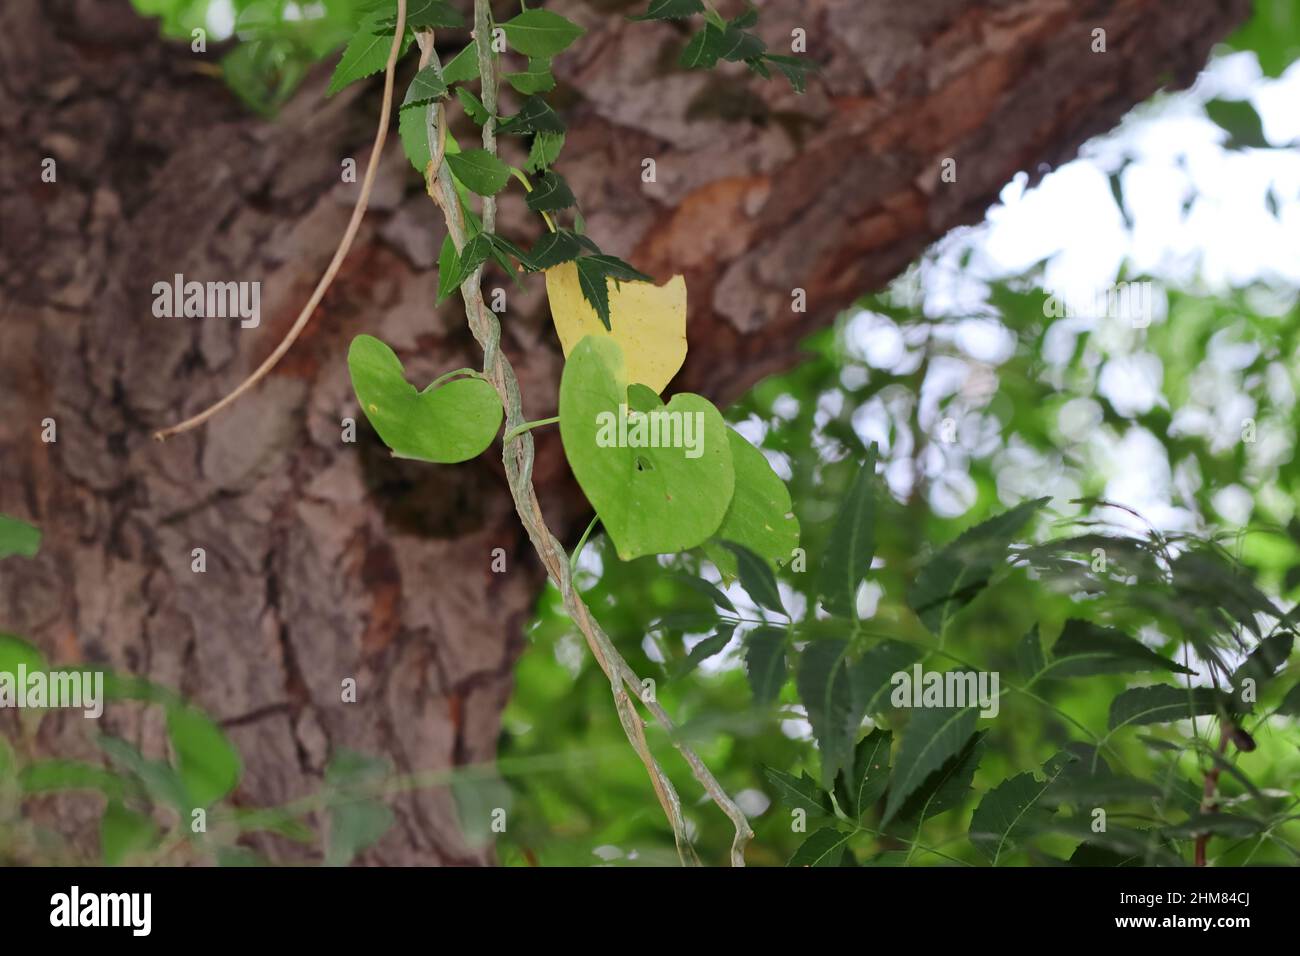 Close-up photo of fresh green heart shaped leaves Giloy vine climbing on a neem tree Stock Photo